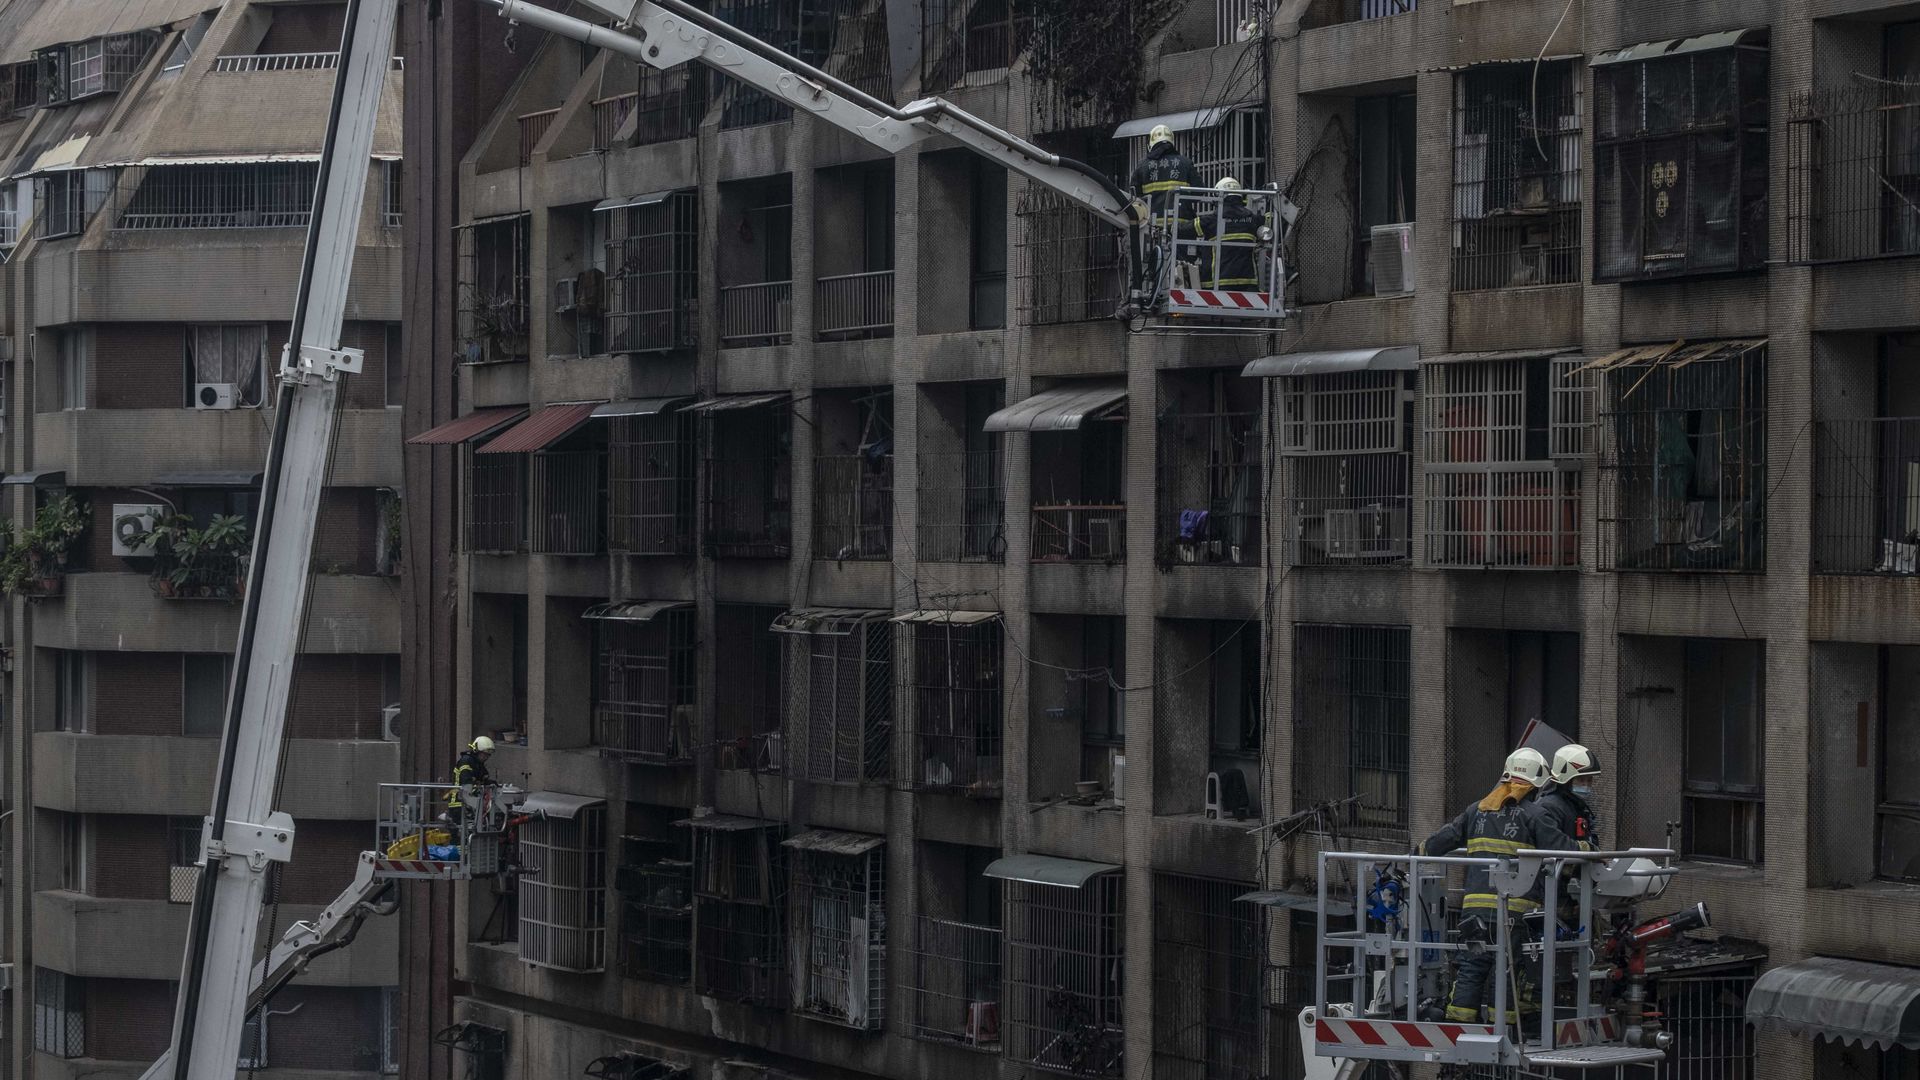 Firefighters searching for victims after a residential building caught fire in Kaohsiung, Taiwan, on Oct. 14.